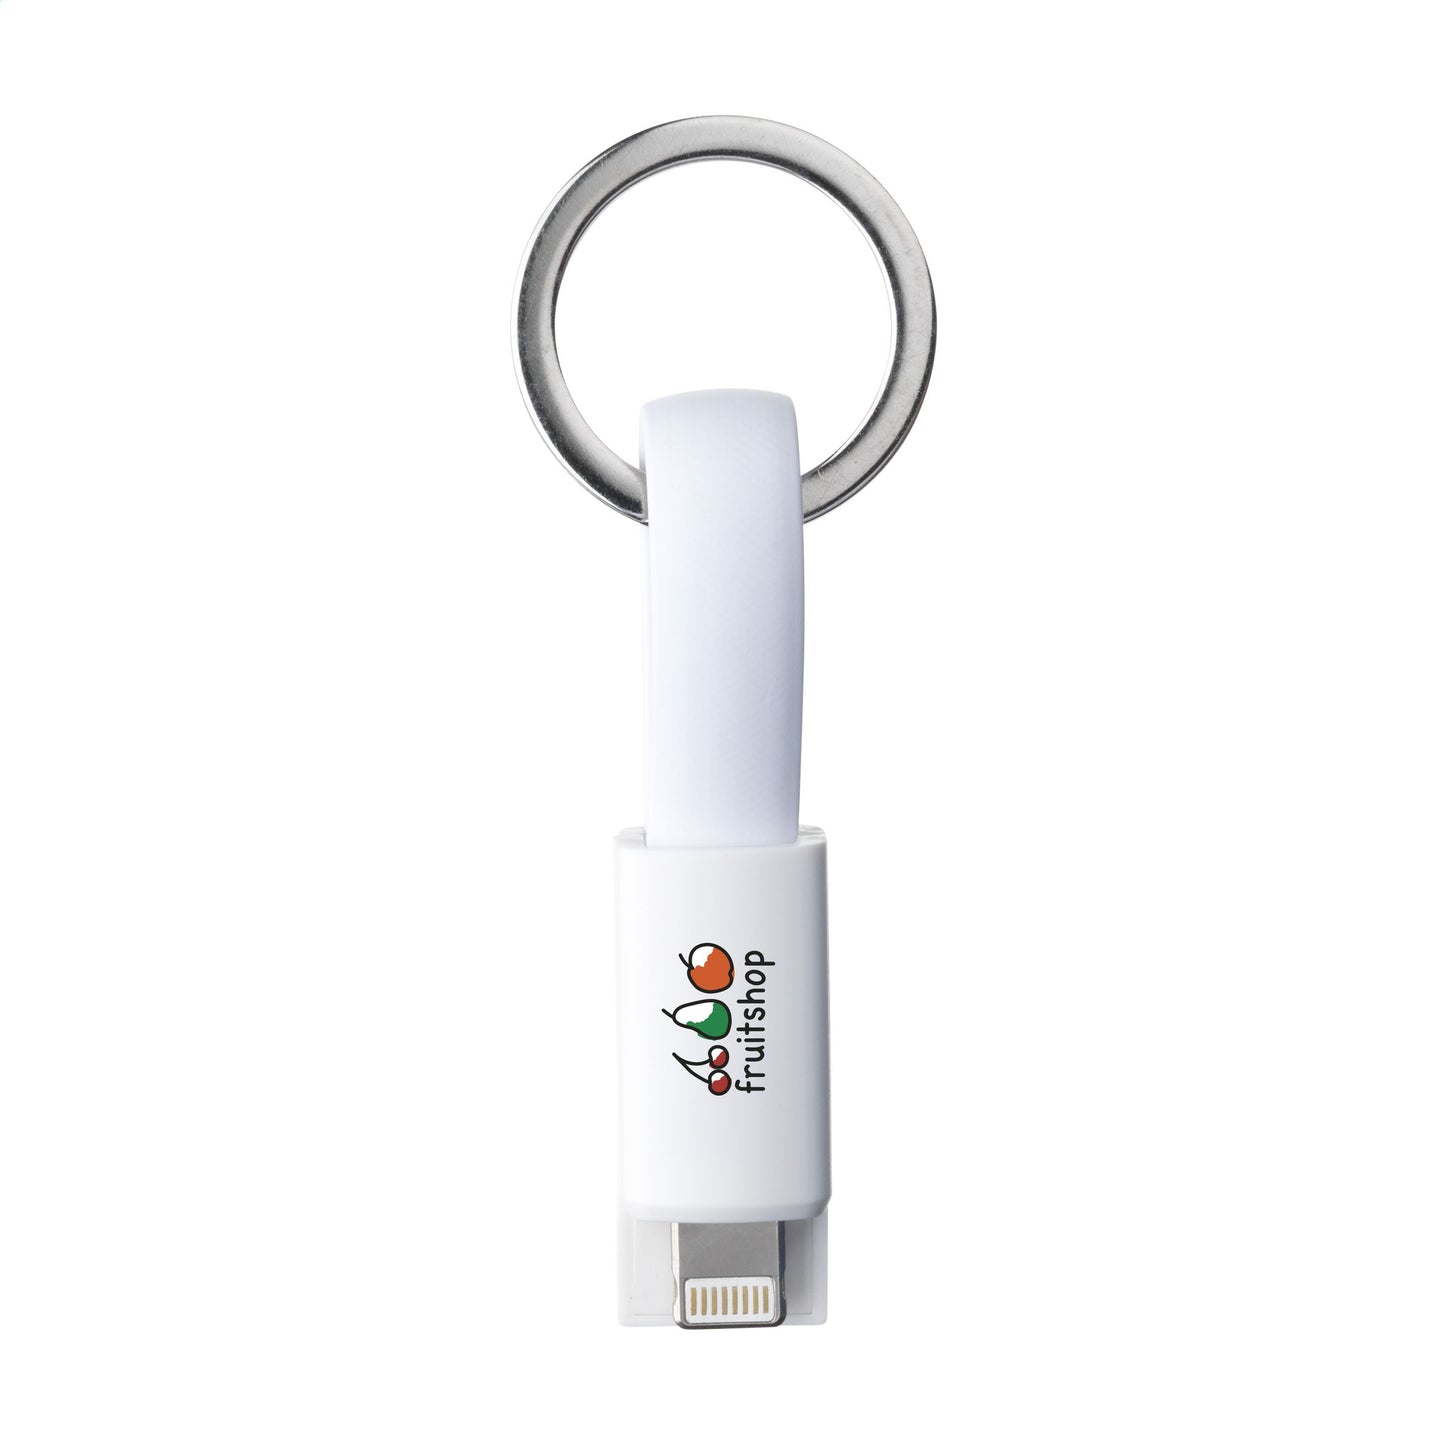 Key Connect 2-in-1 Ladeanschluss